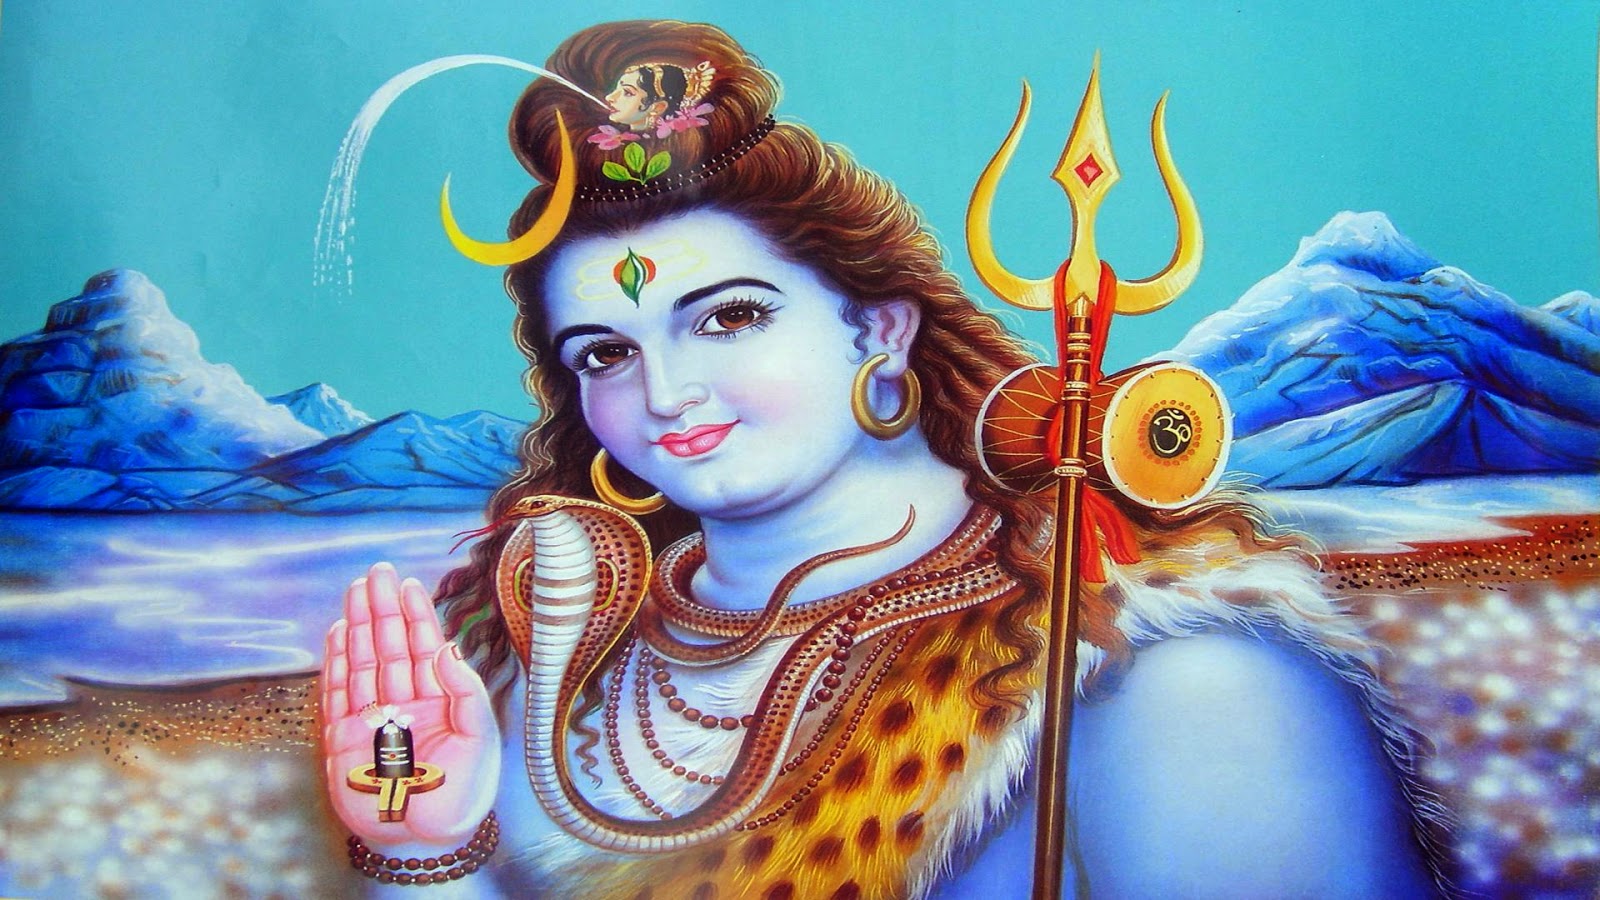 God Shiva HD Images wallpapers photos pictures gallery | Hindu God Image -  